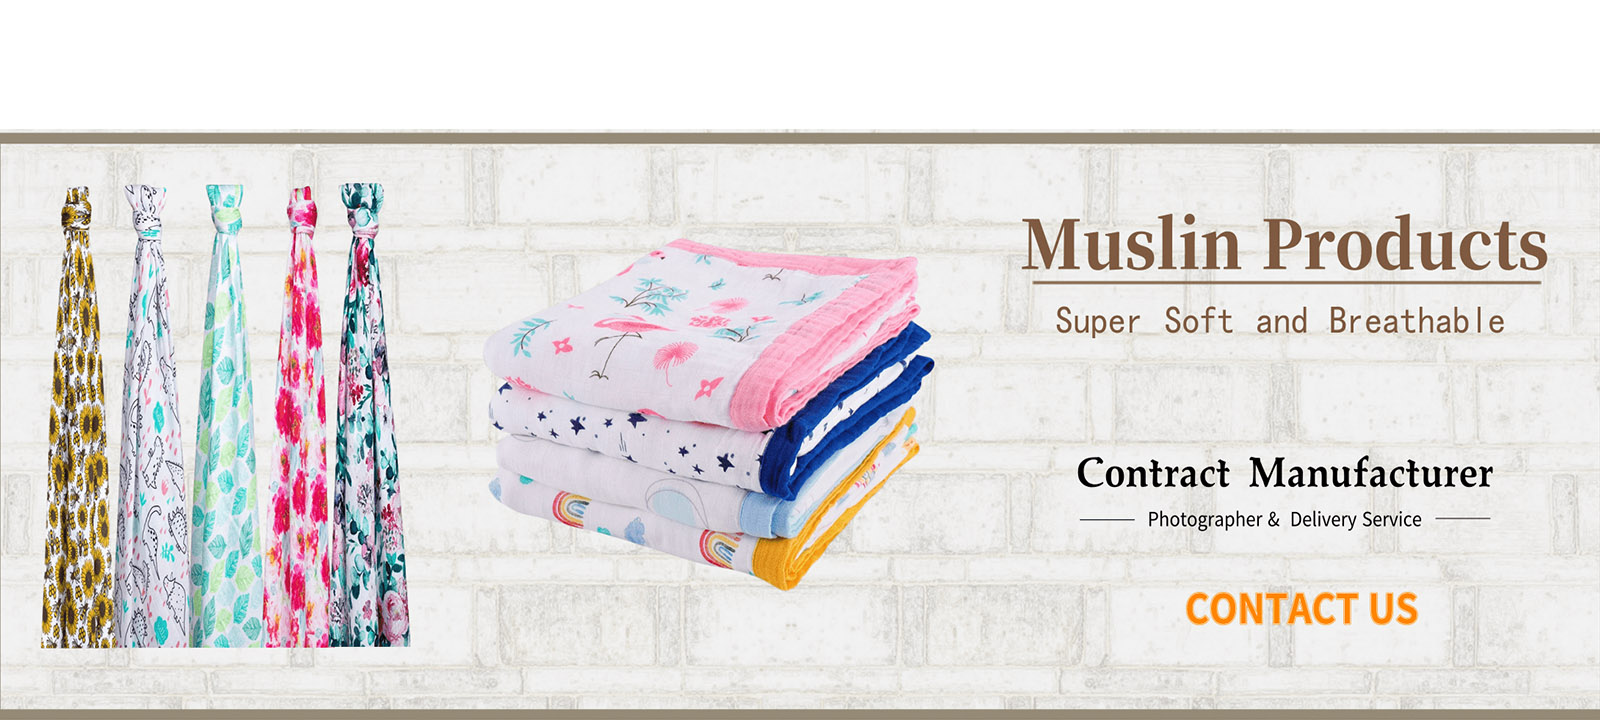 Muslin products